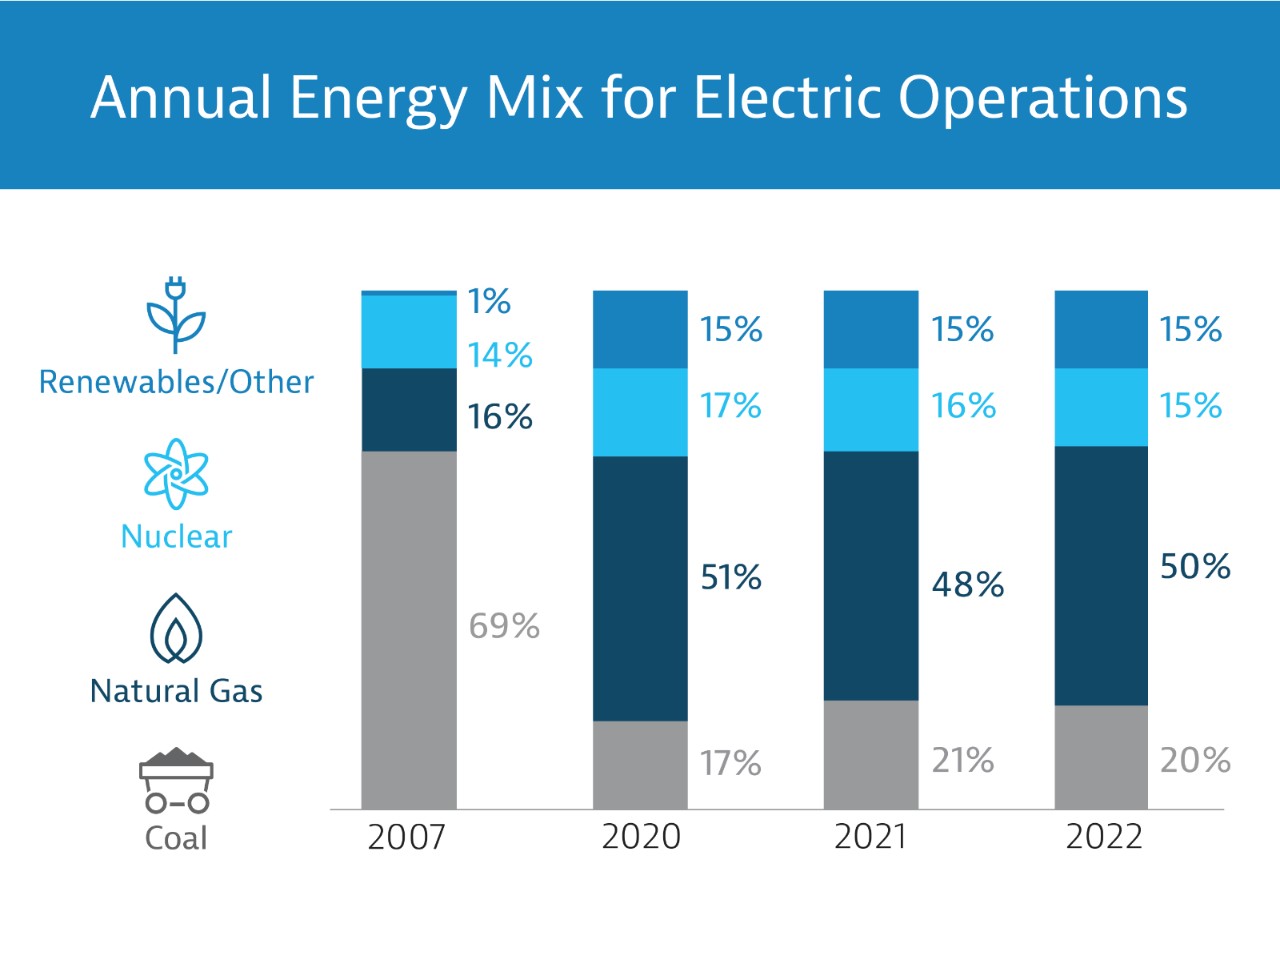 Southern Company’s Annual Energy Mix graph from coal to renewable energy 